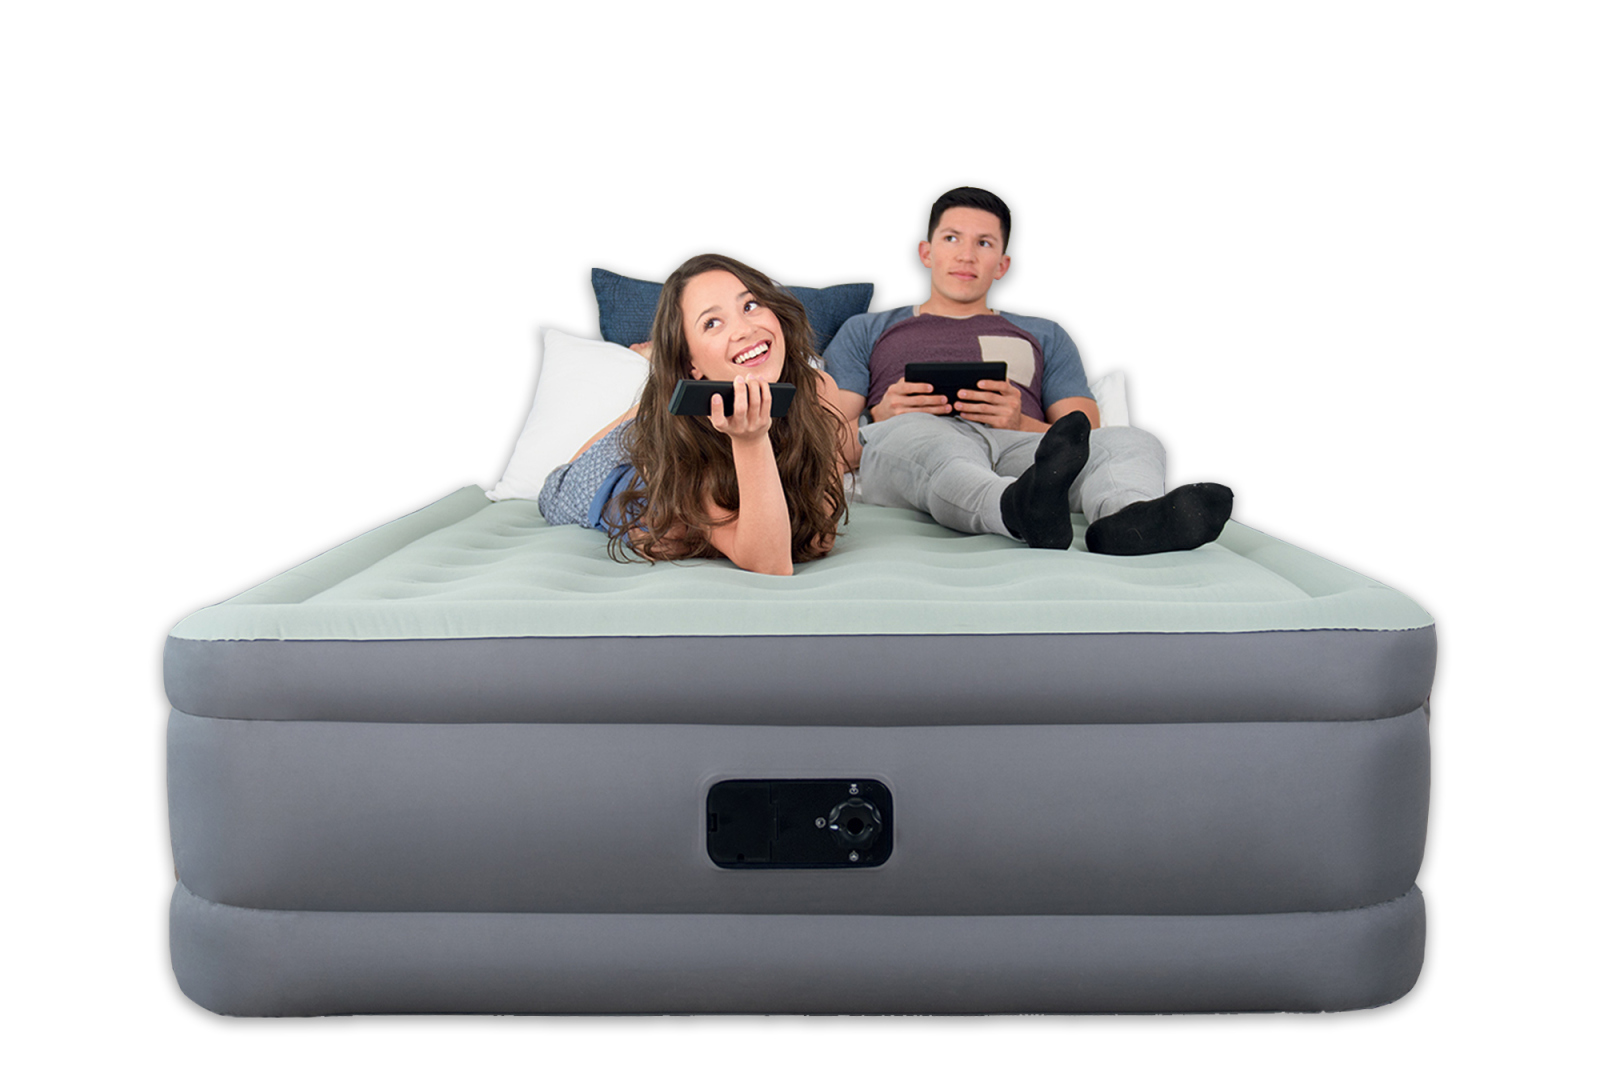 Bestway Airbed with Built-In Electric Pump - image 2 of 3